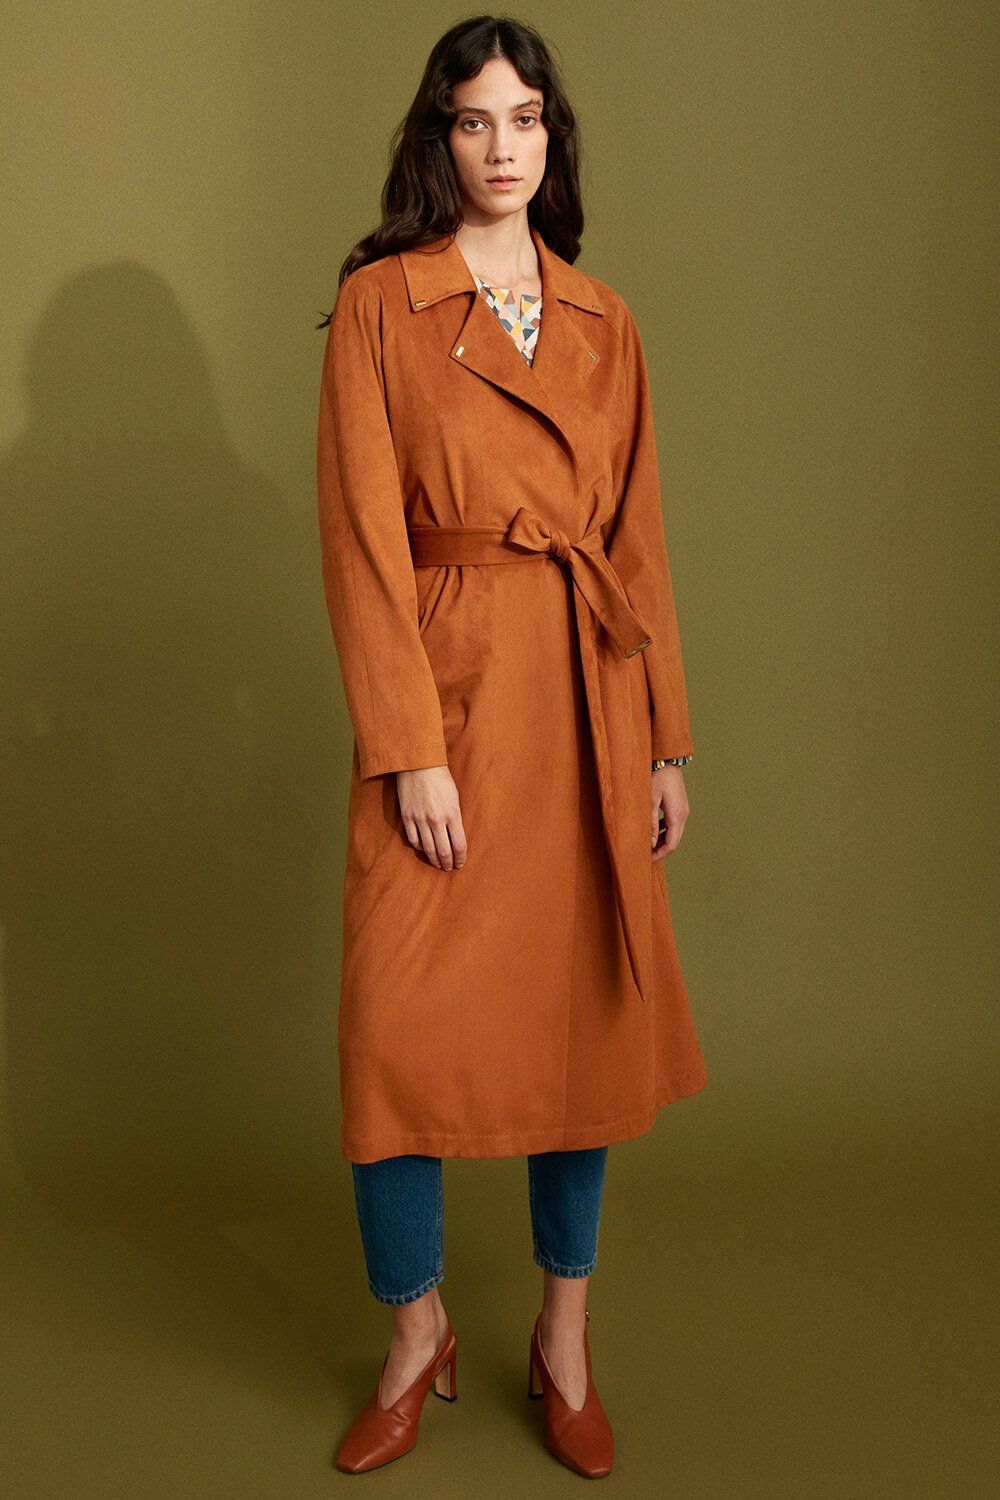 Through its flowy fabric and soft texture, this take on the classic trench coat is perfect for seasonal transitions. This terracotta, trench style coat is defined by a clean-cut silhouette, narrow shoulders, and a wrap close belt. The refined silhouette can be worn belted for a fitted look combined with your favourite dress and heels or simply with sneakers and jeans for a more casual daytime look.

Mid-calf length
Long sleeves
Wrap close belt
Terracotta colour
Model is 5'10